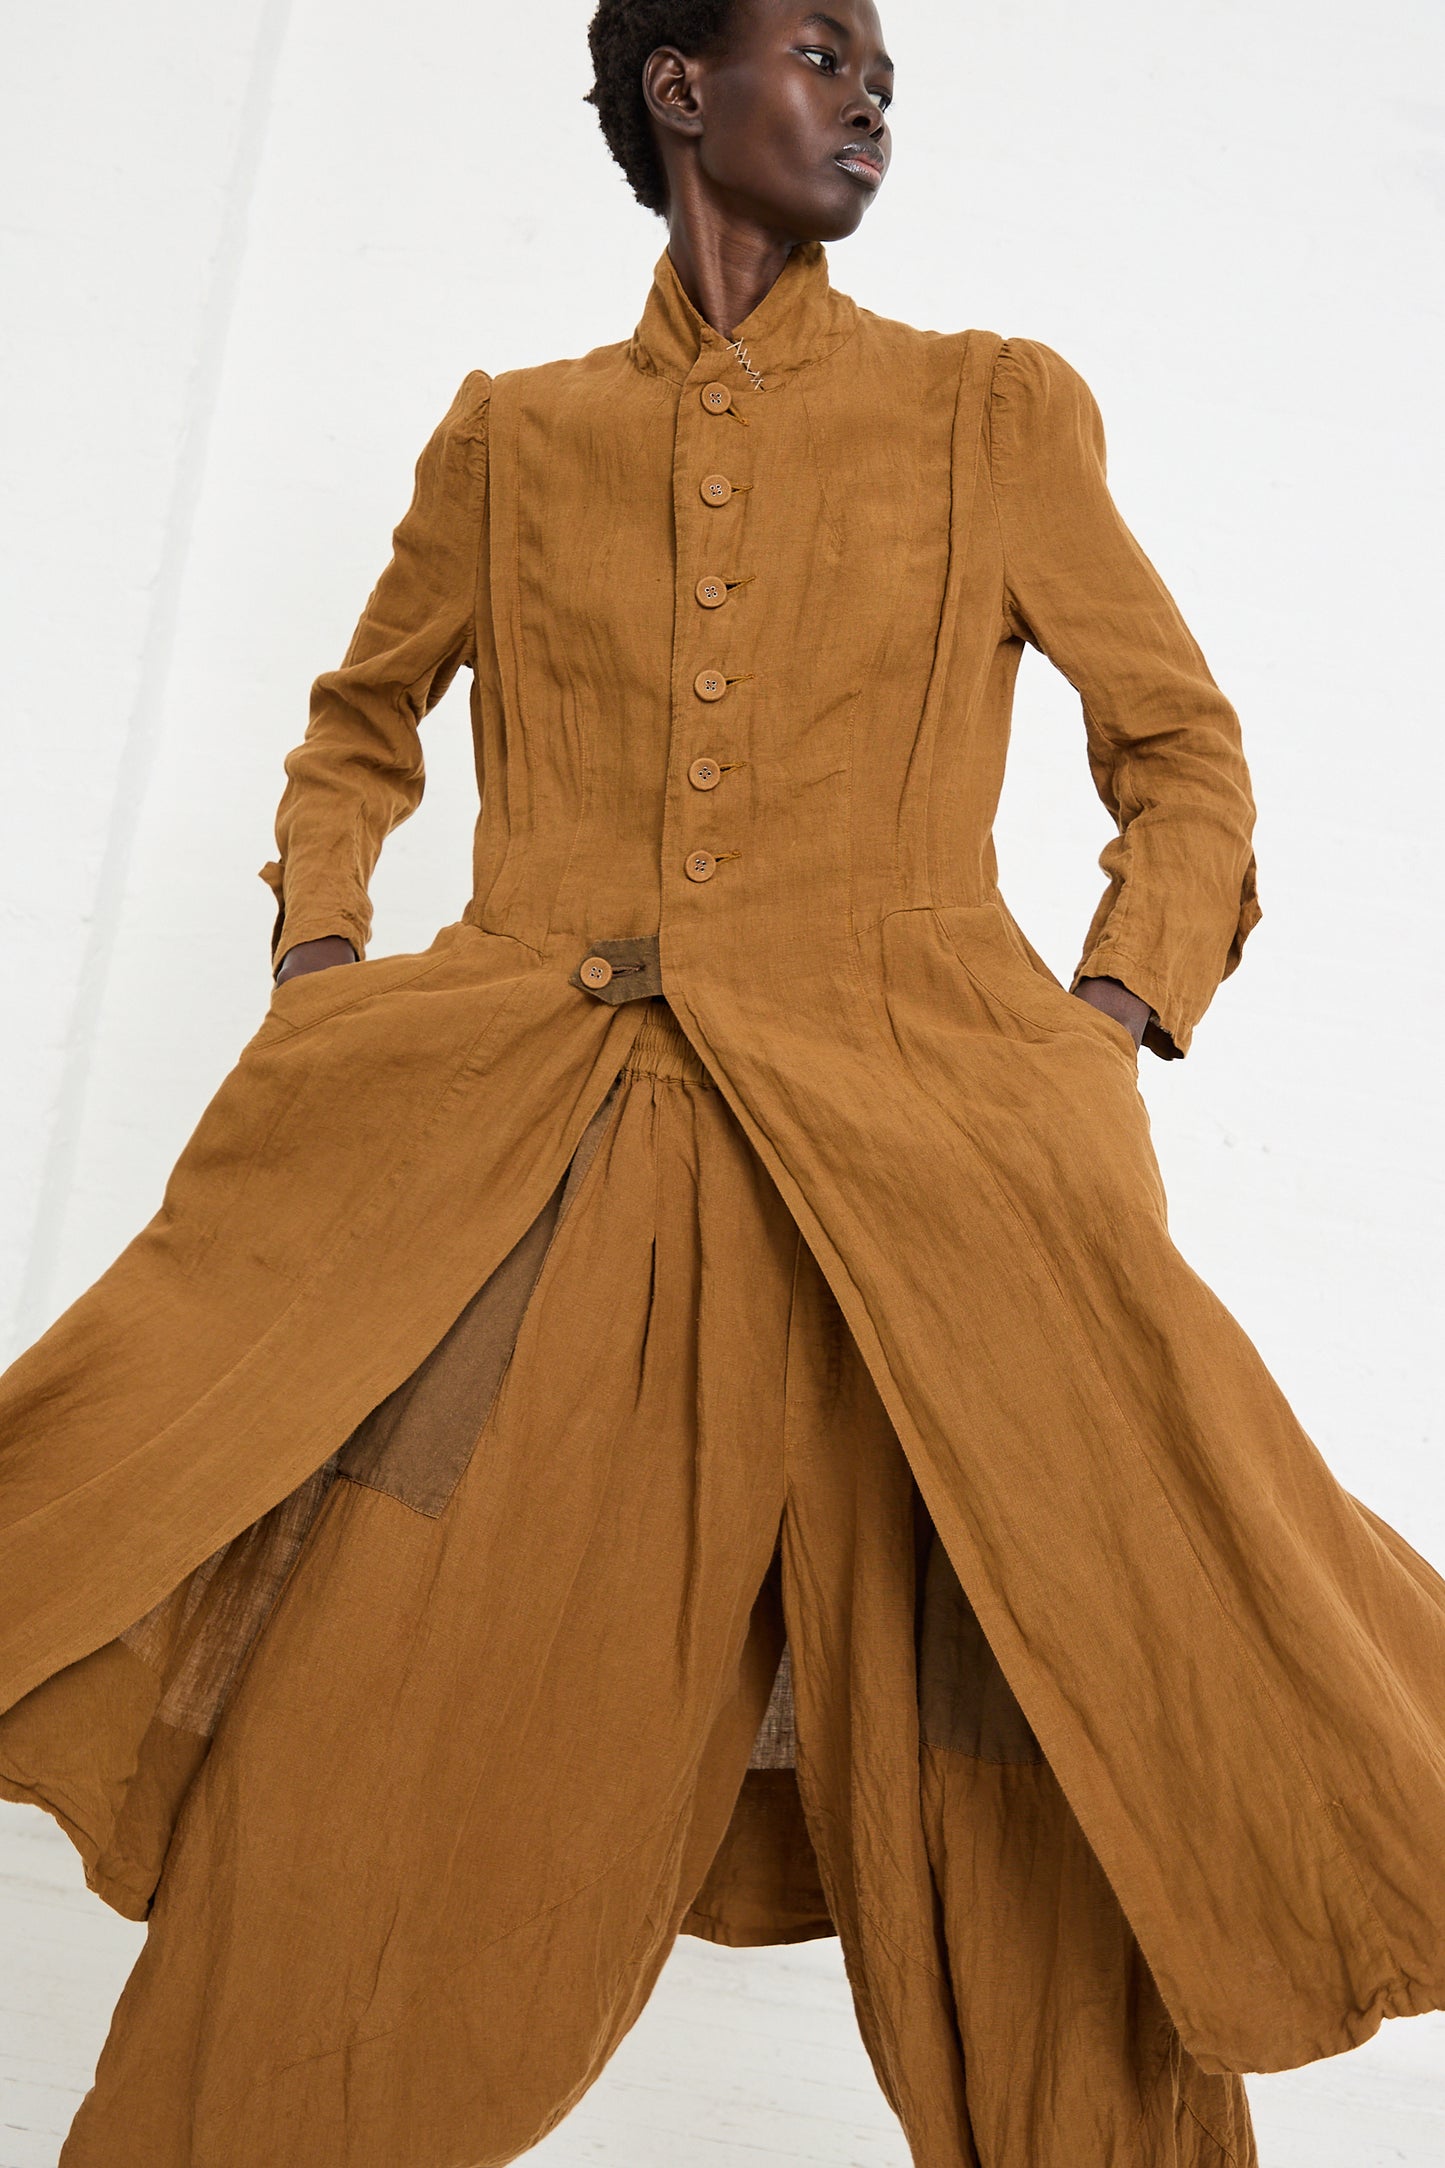 A person stands with hands in pockets, wearing the Hallelujah Linen Manteau de Pompier 1800's in Coffee. The long brown dress boasts layered fabric and a high collar. The background is plain white.